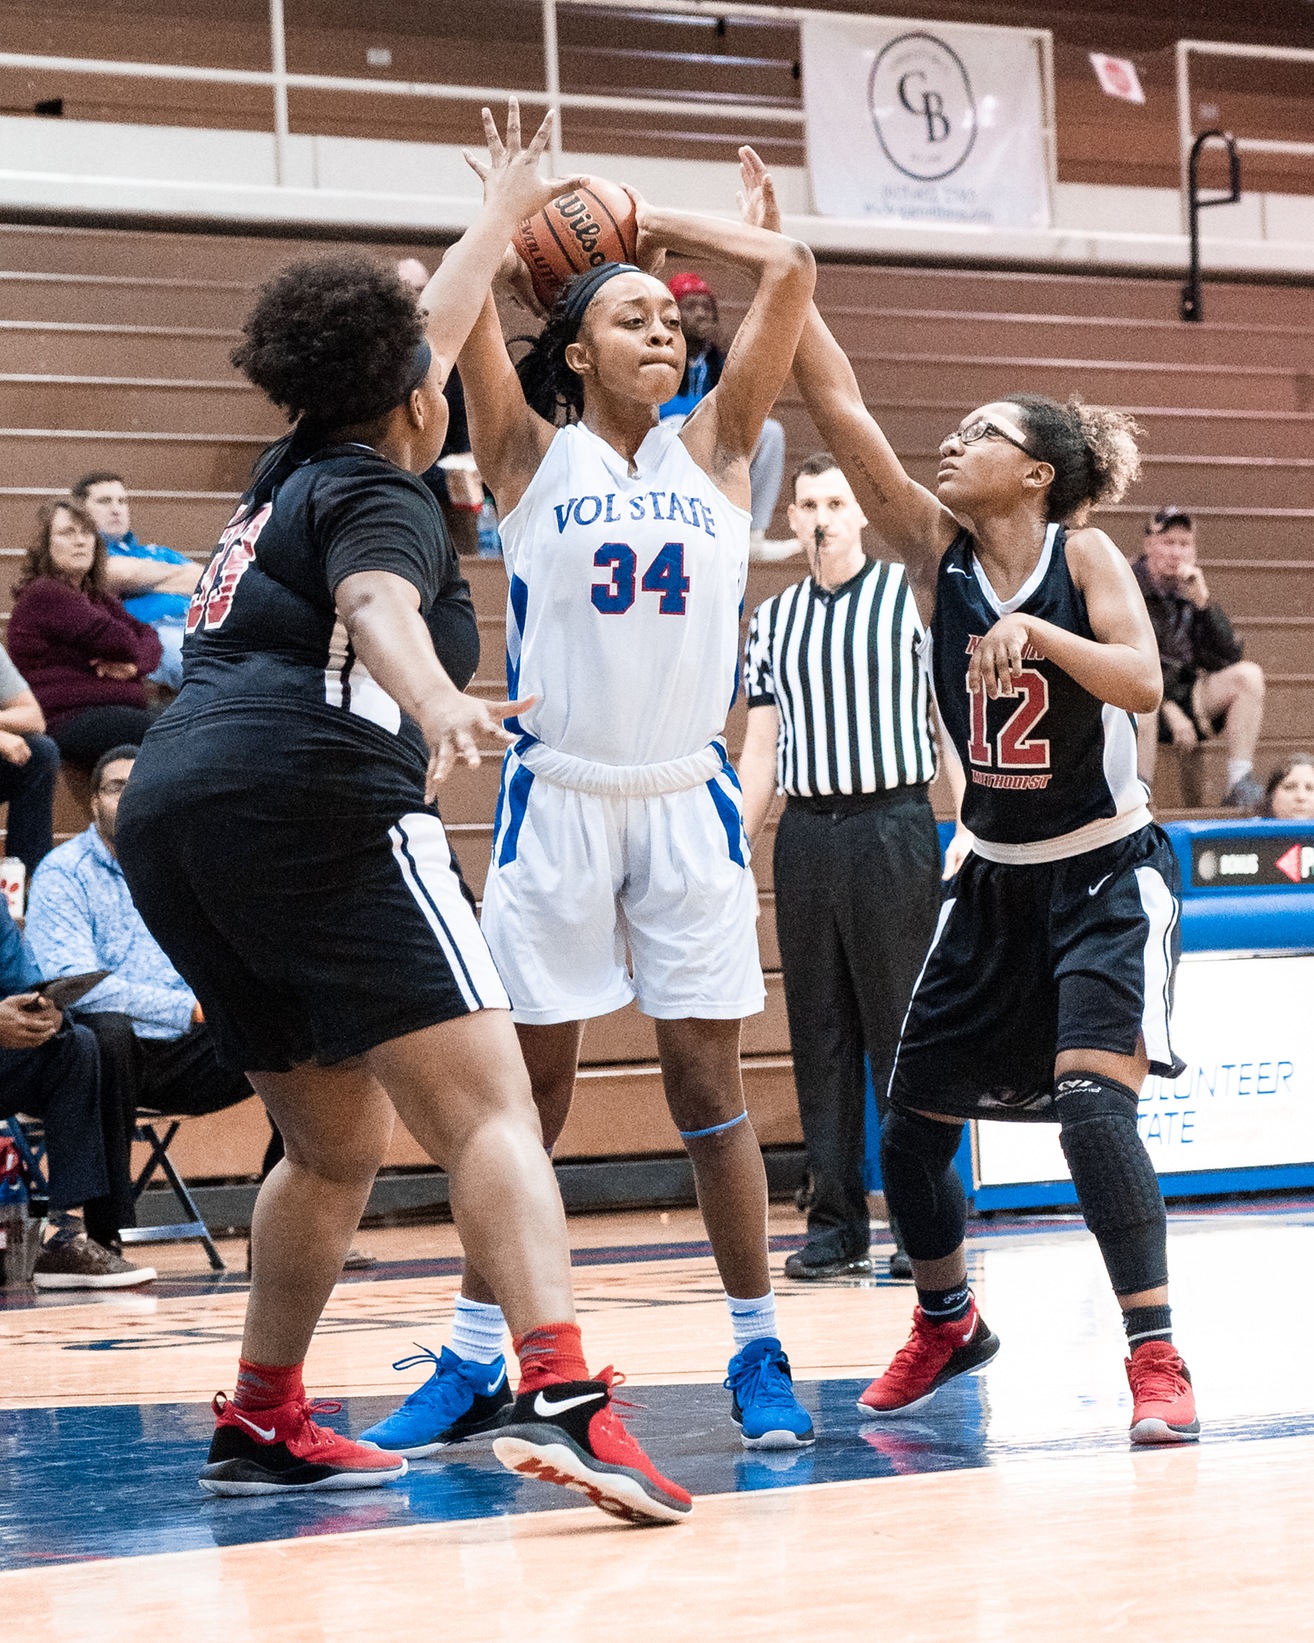 Lady Pioneers Drop Close One to Chattanooga State